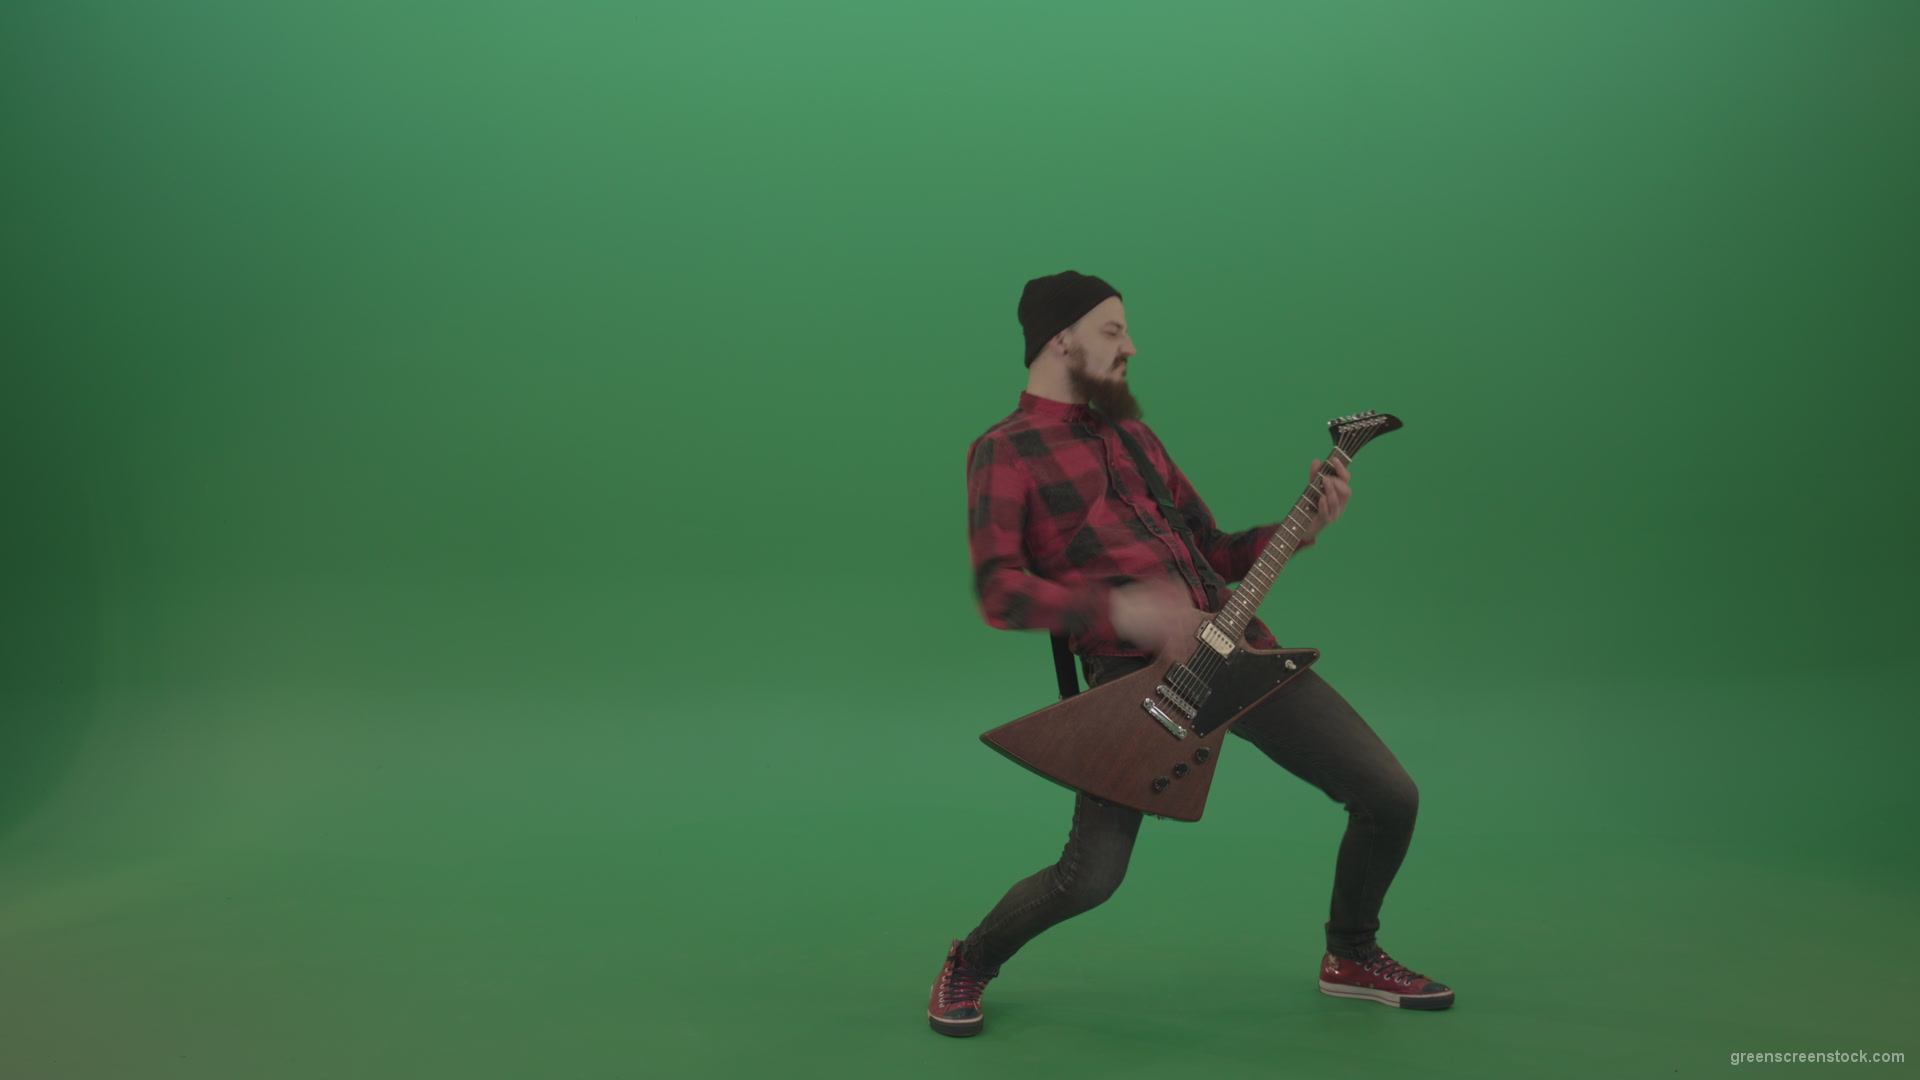 Punk-rock-full-size-man-guitarist-play-guitar-with-emotions-on-green-screen_005 Green Screen Stock